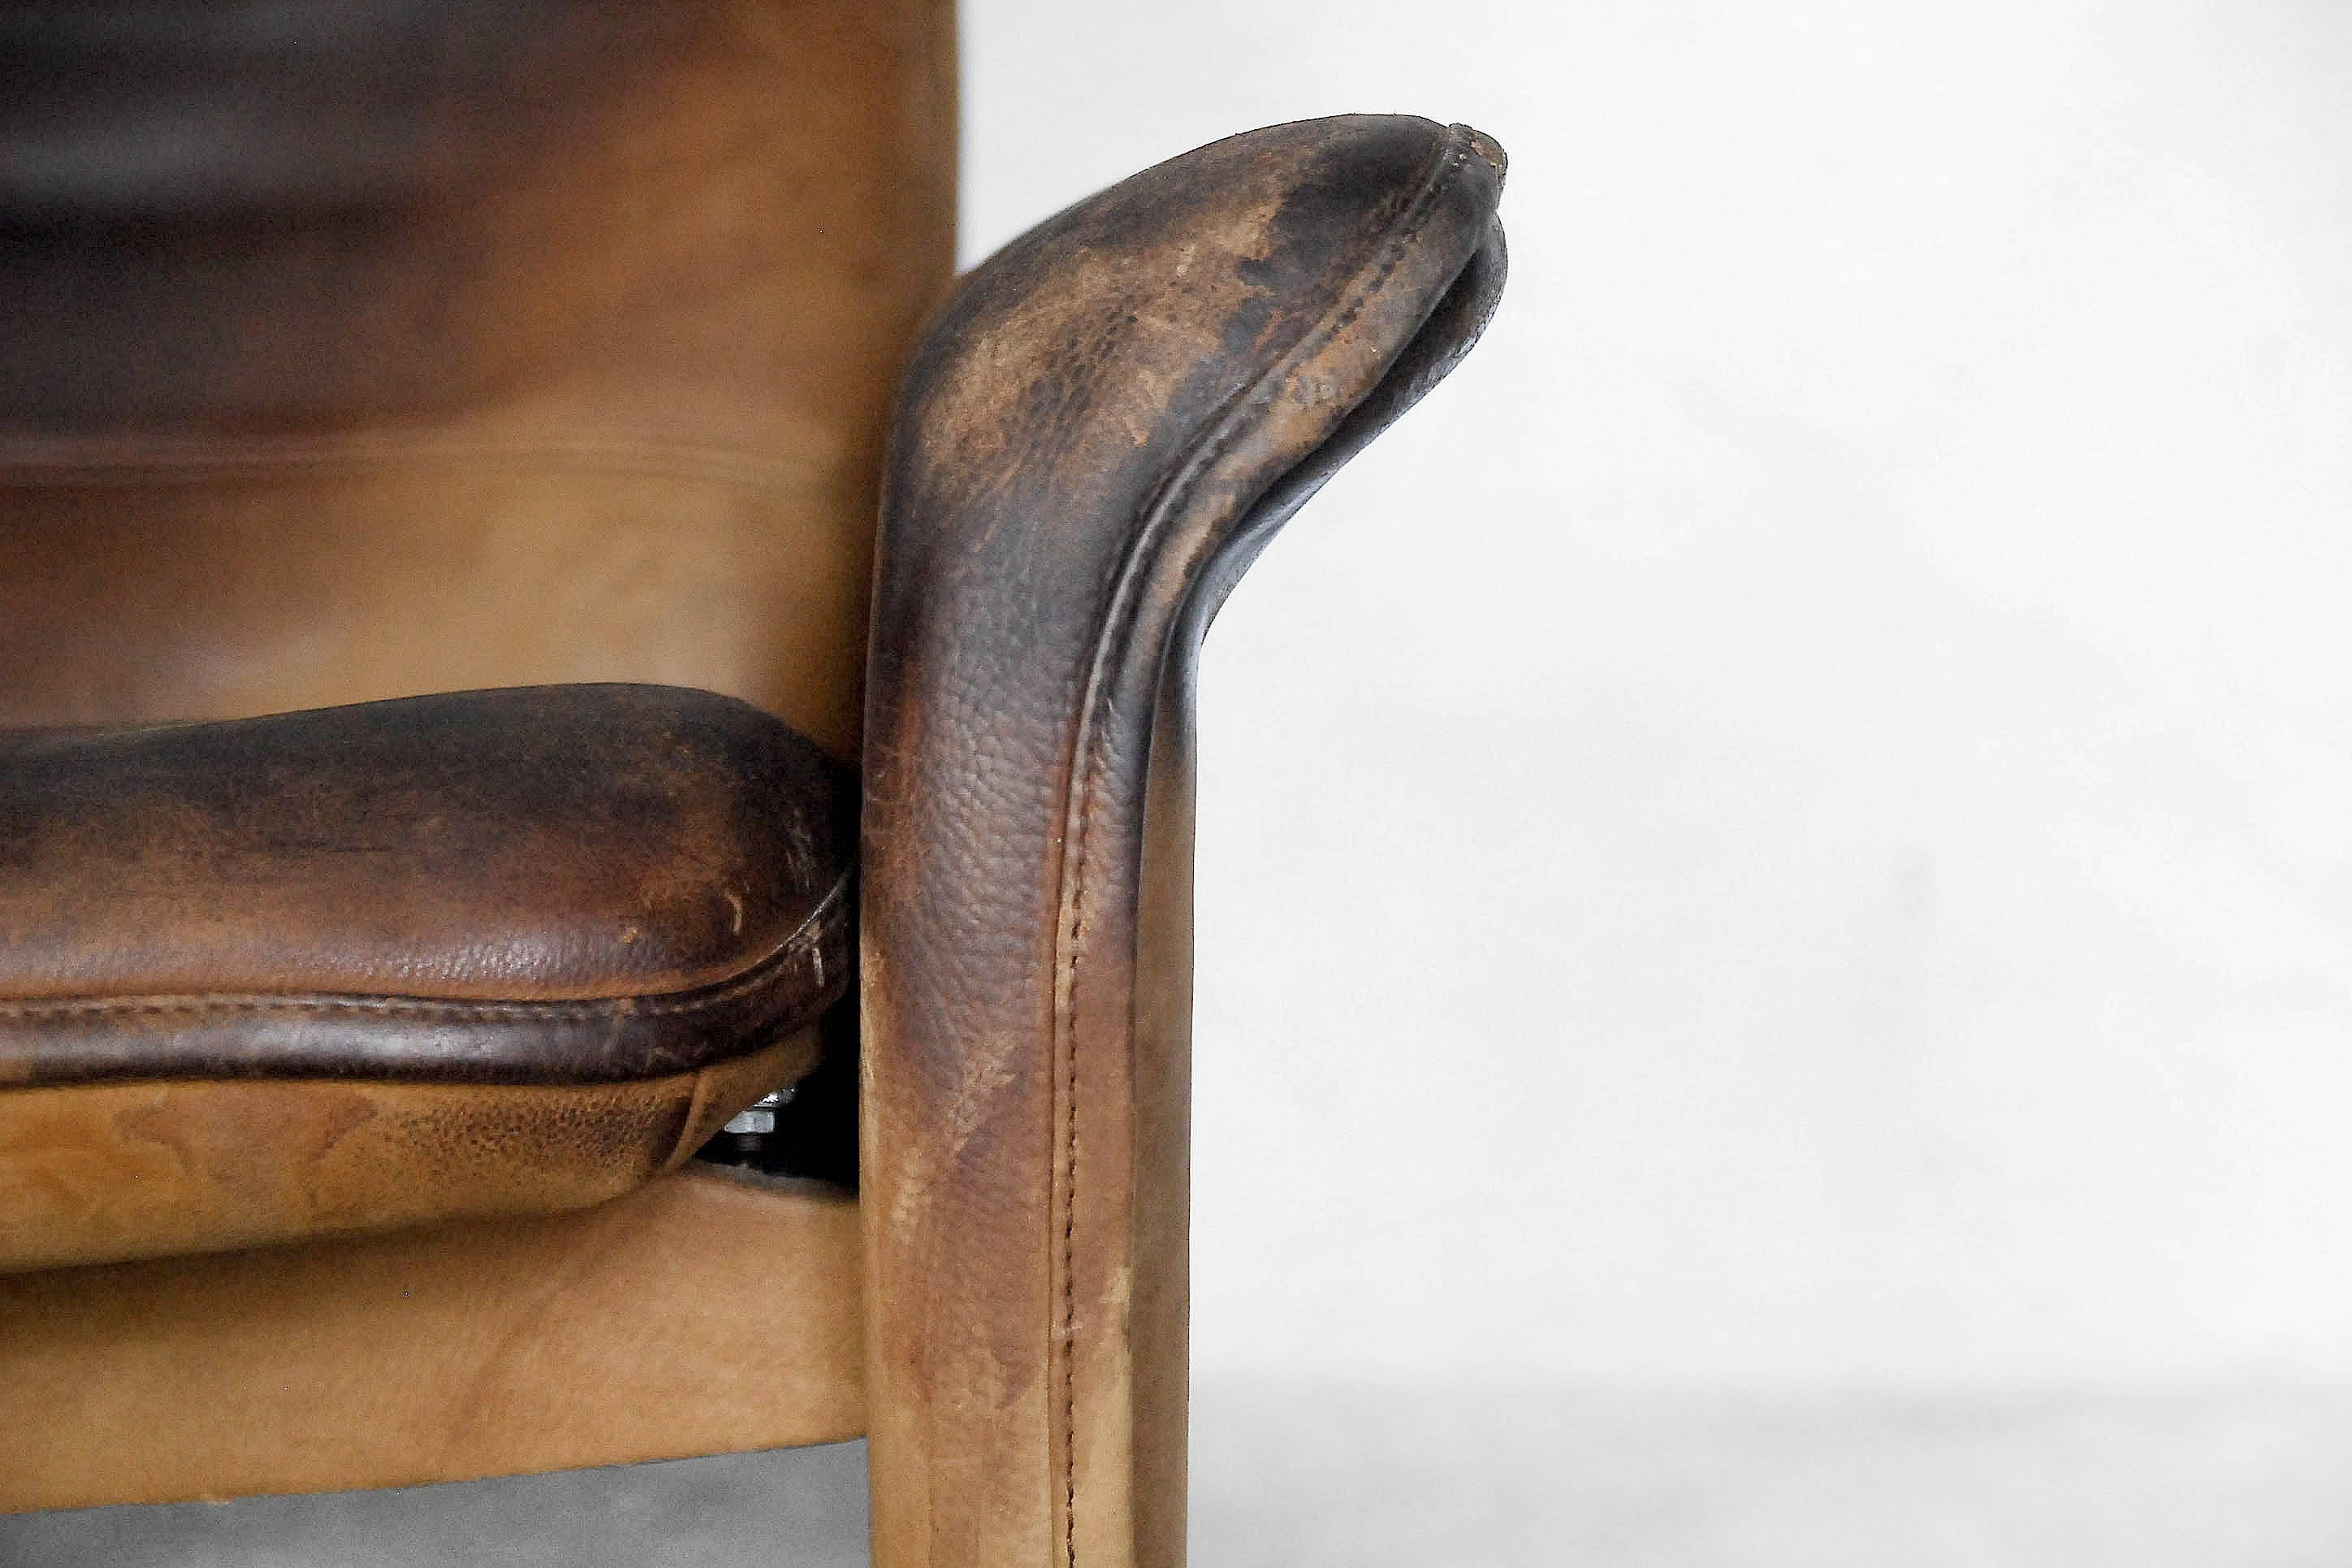 This vintage lounge armchair was manufactured in Switzerland by De Sede, during the 1970s, and is a model DS-50. De Sede is renowned worldwide for quality leather furniture making, and this piece is upholstered in thick brown leather with hand